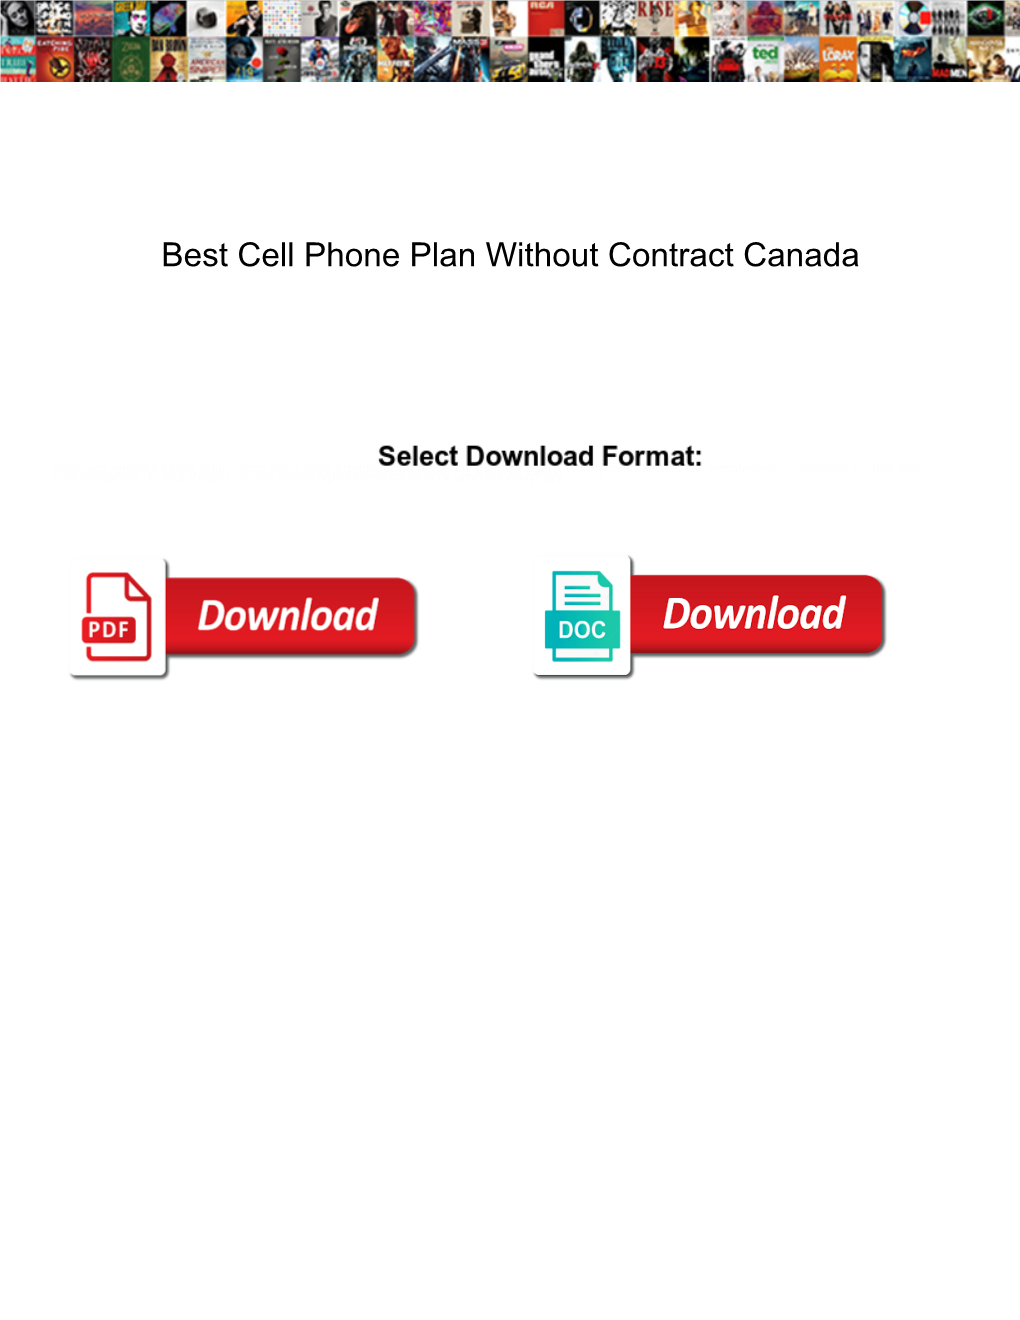 Best Cell Phone Plan Without Contract Canada